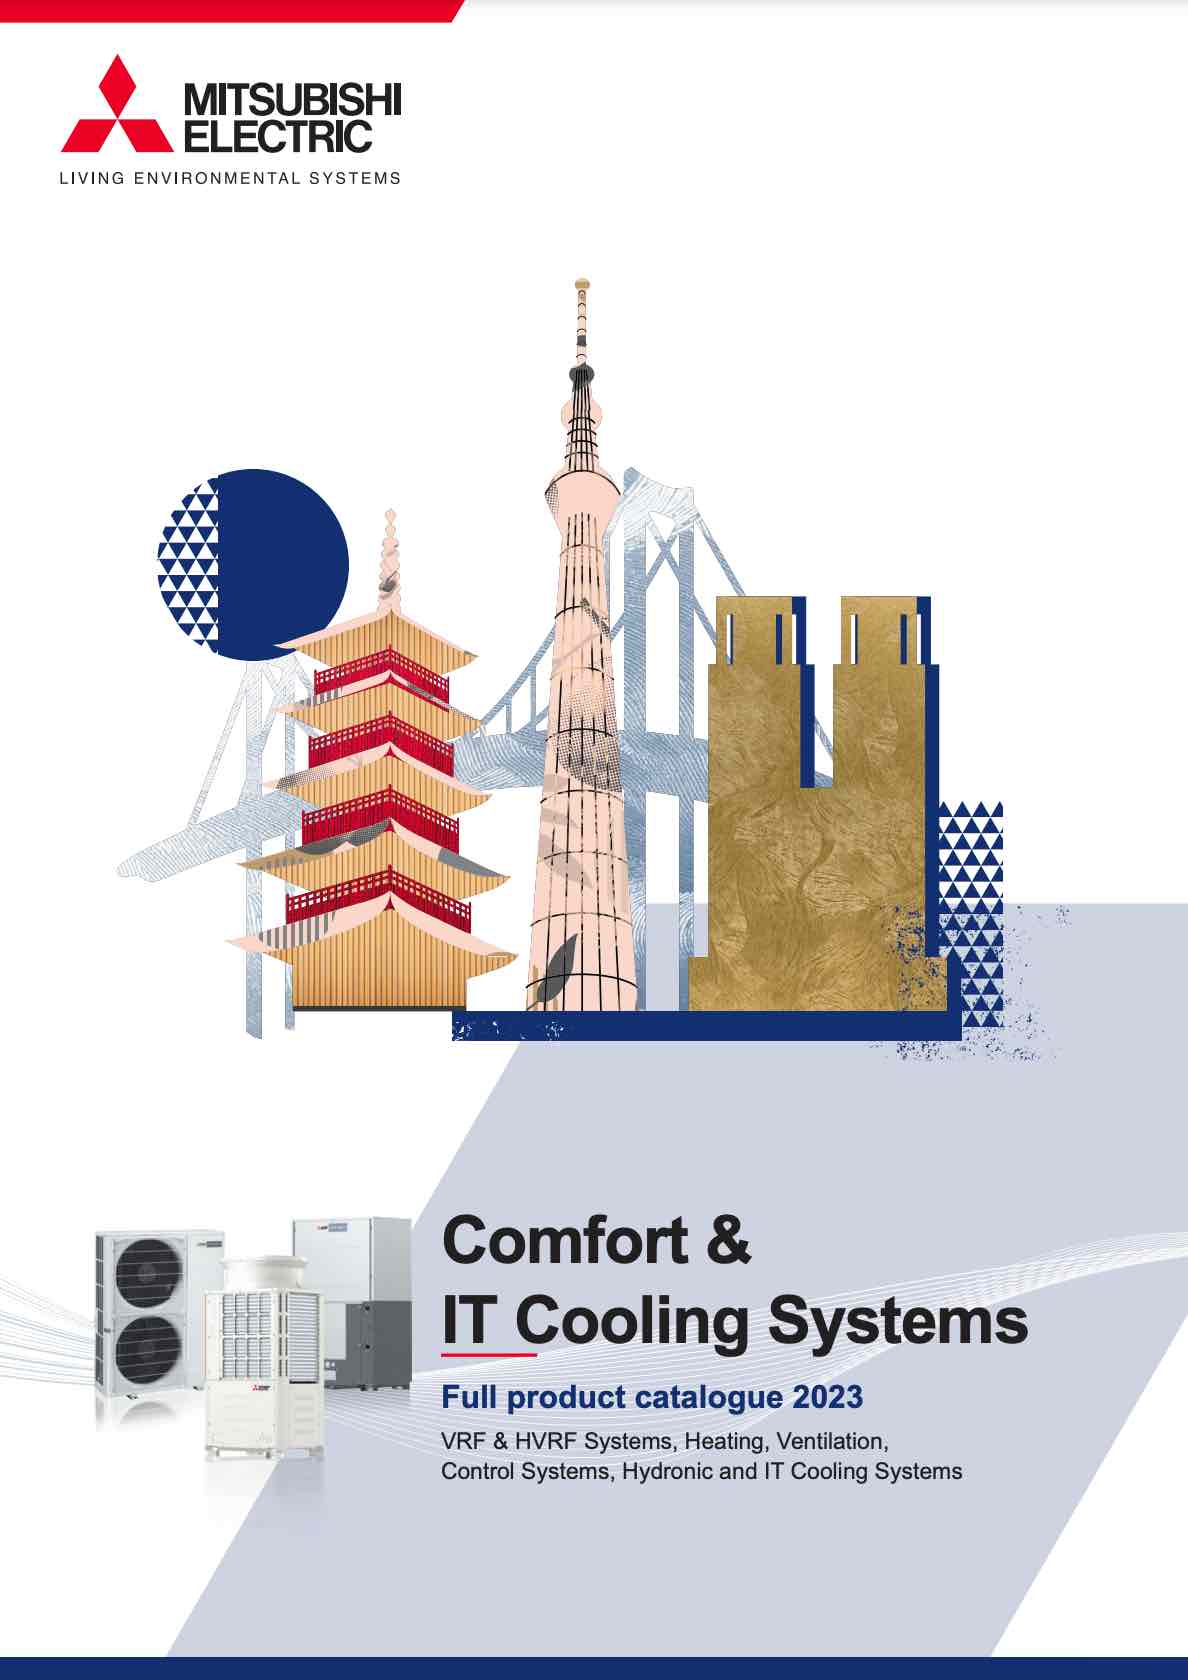 Comfort & IT Cooling Systems 2023.